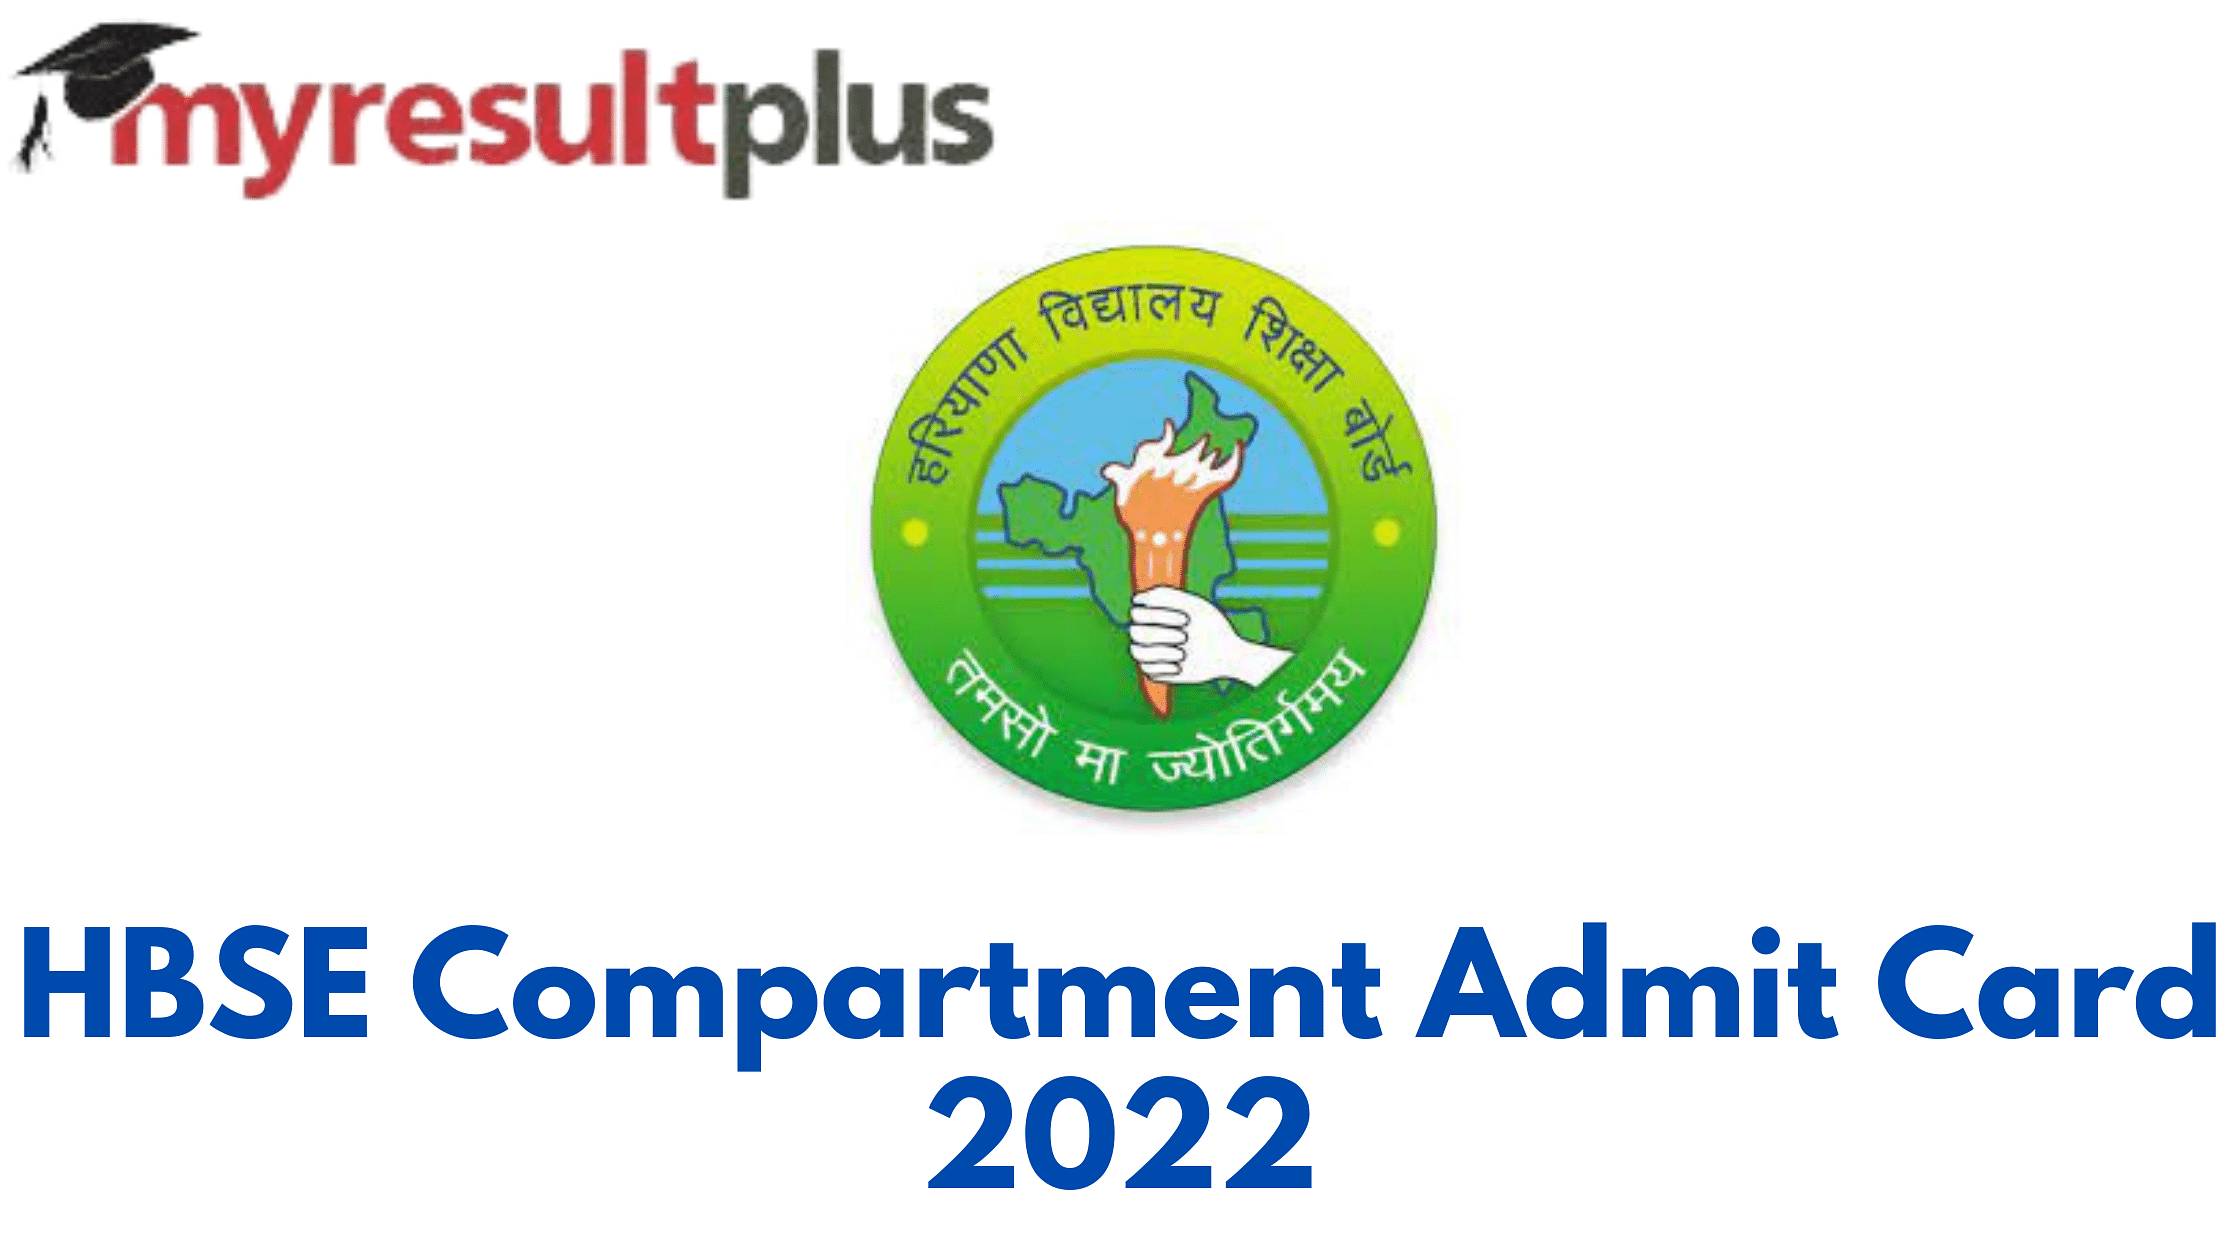 HBSE Compartment Admit Card 2022 Available for Download, Direct Link Here